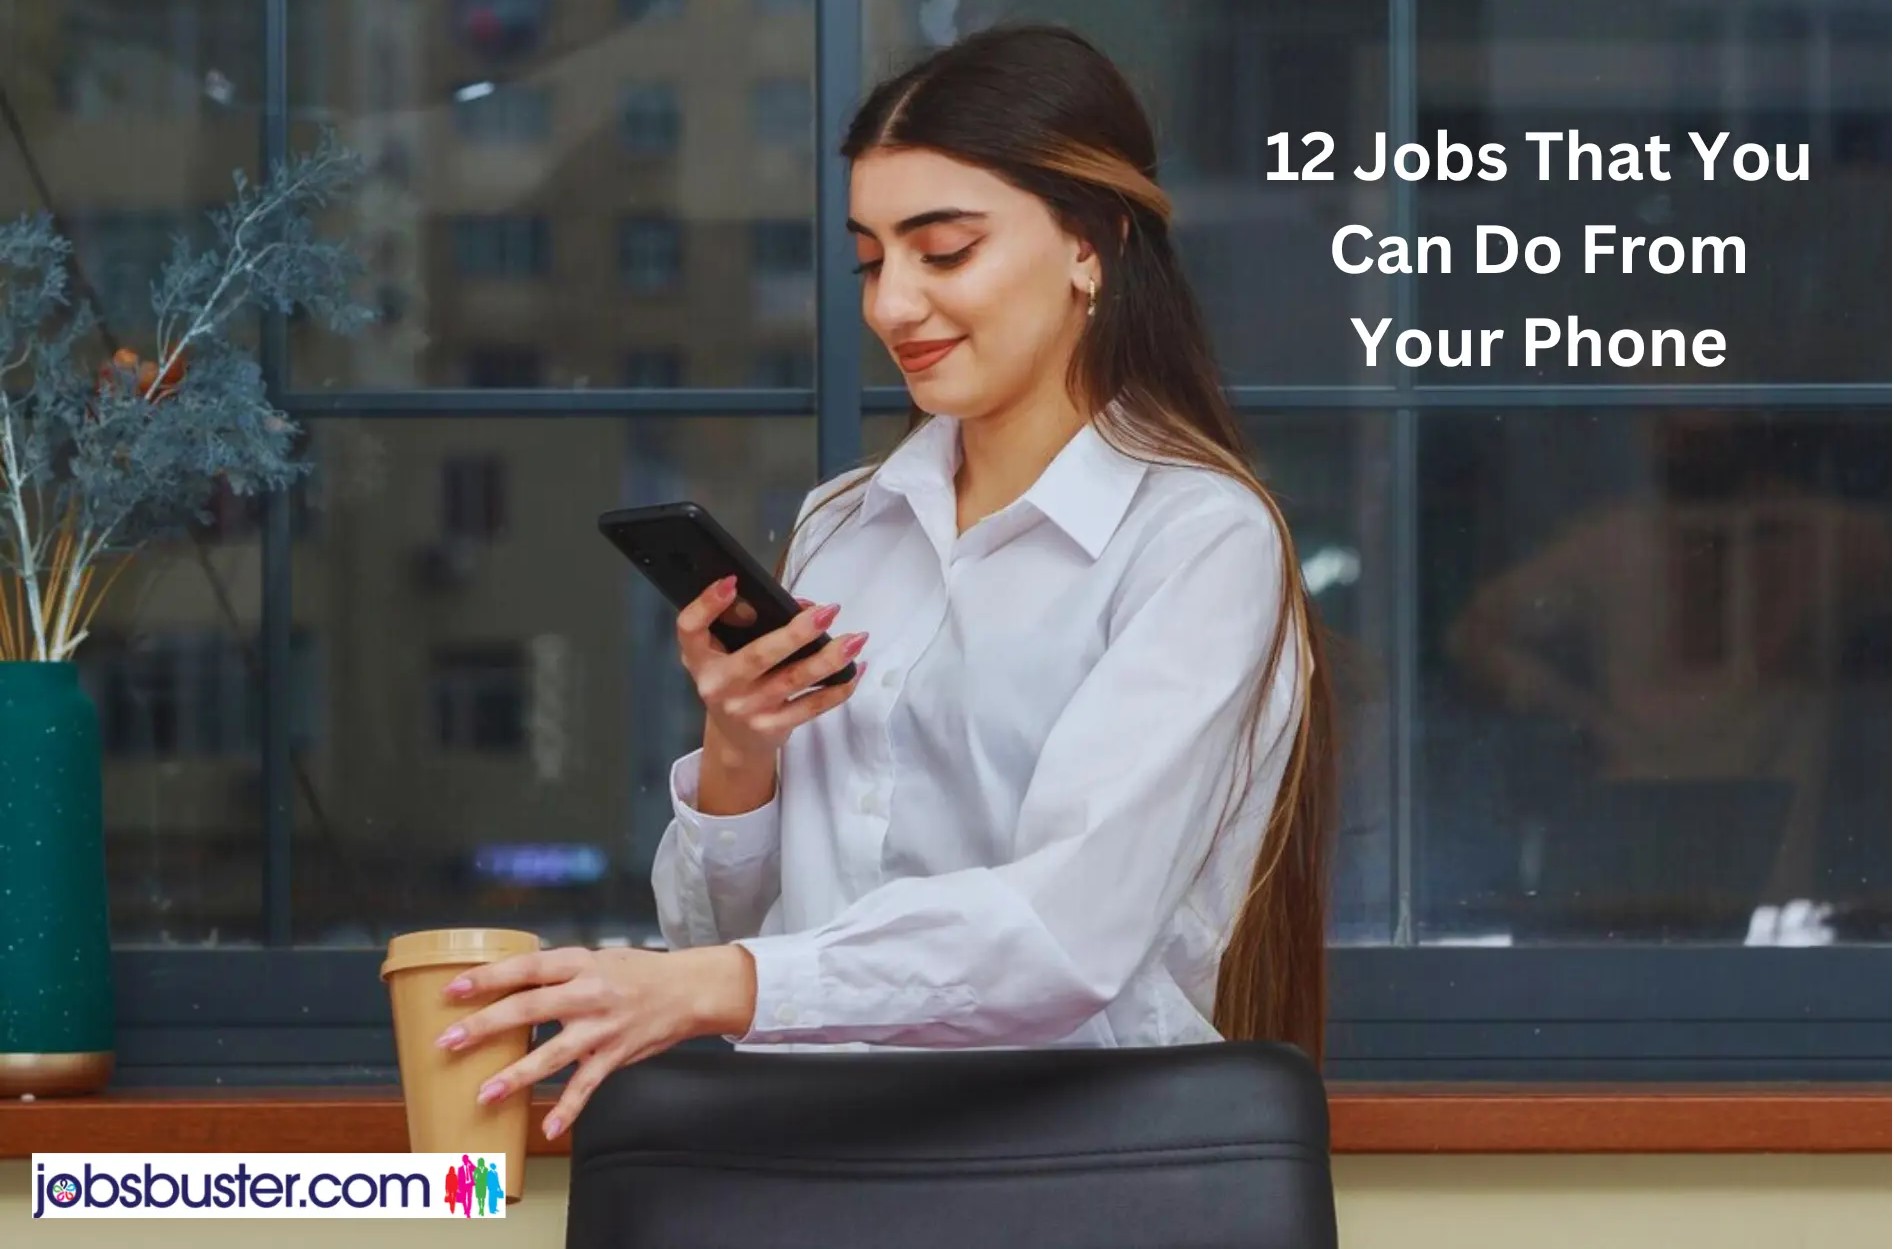 12 Jobs That You Can Do From Your Phone